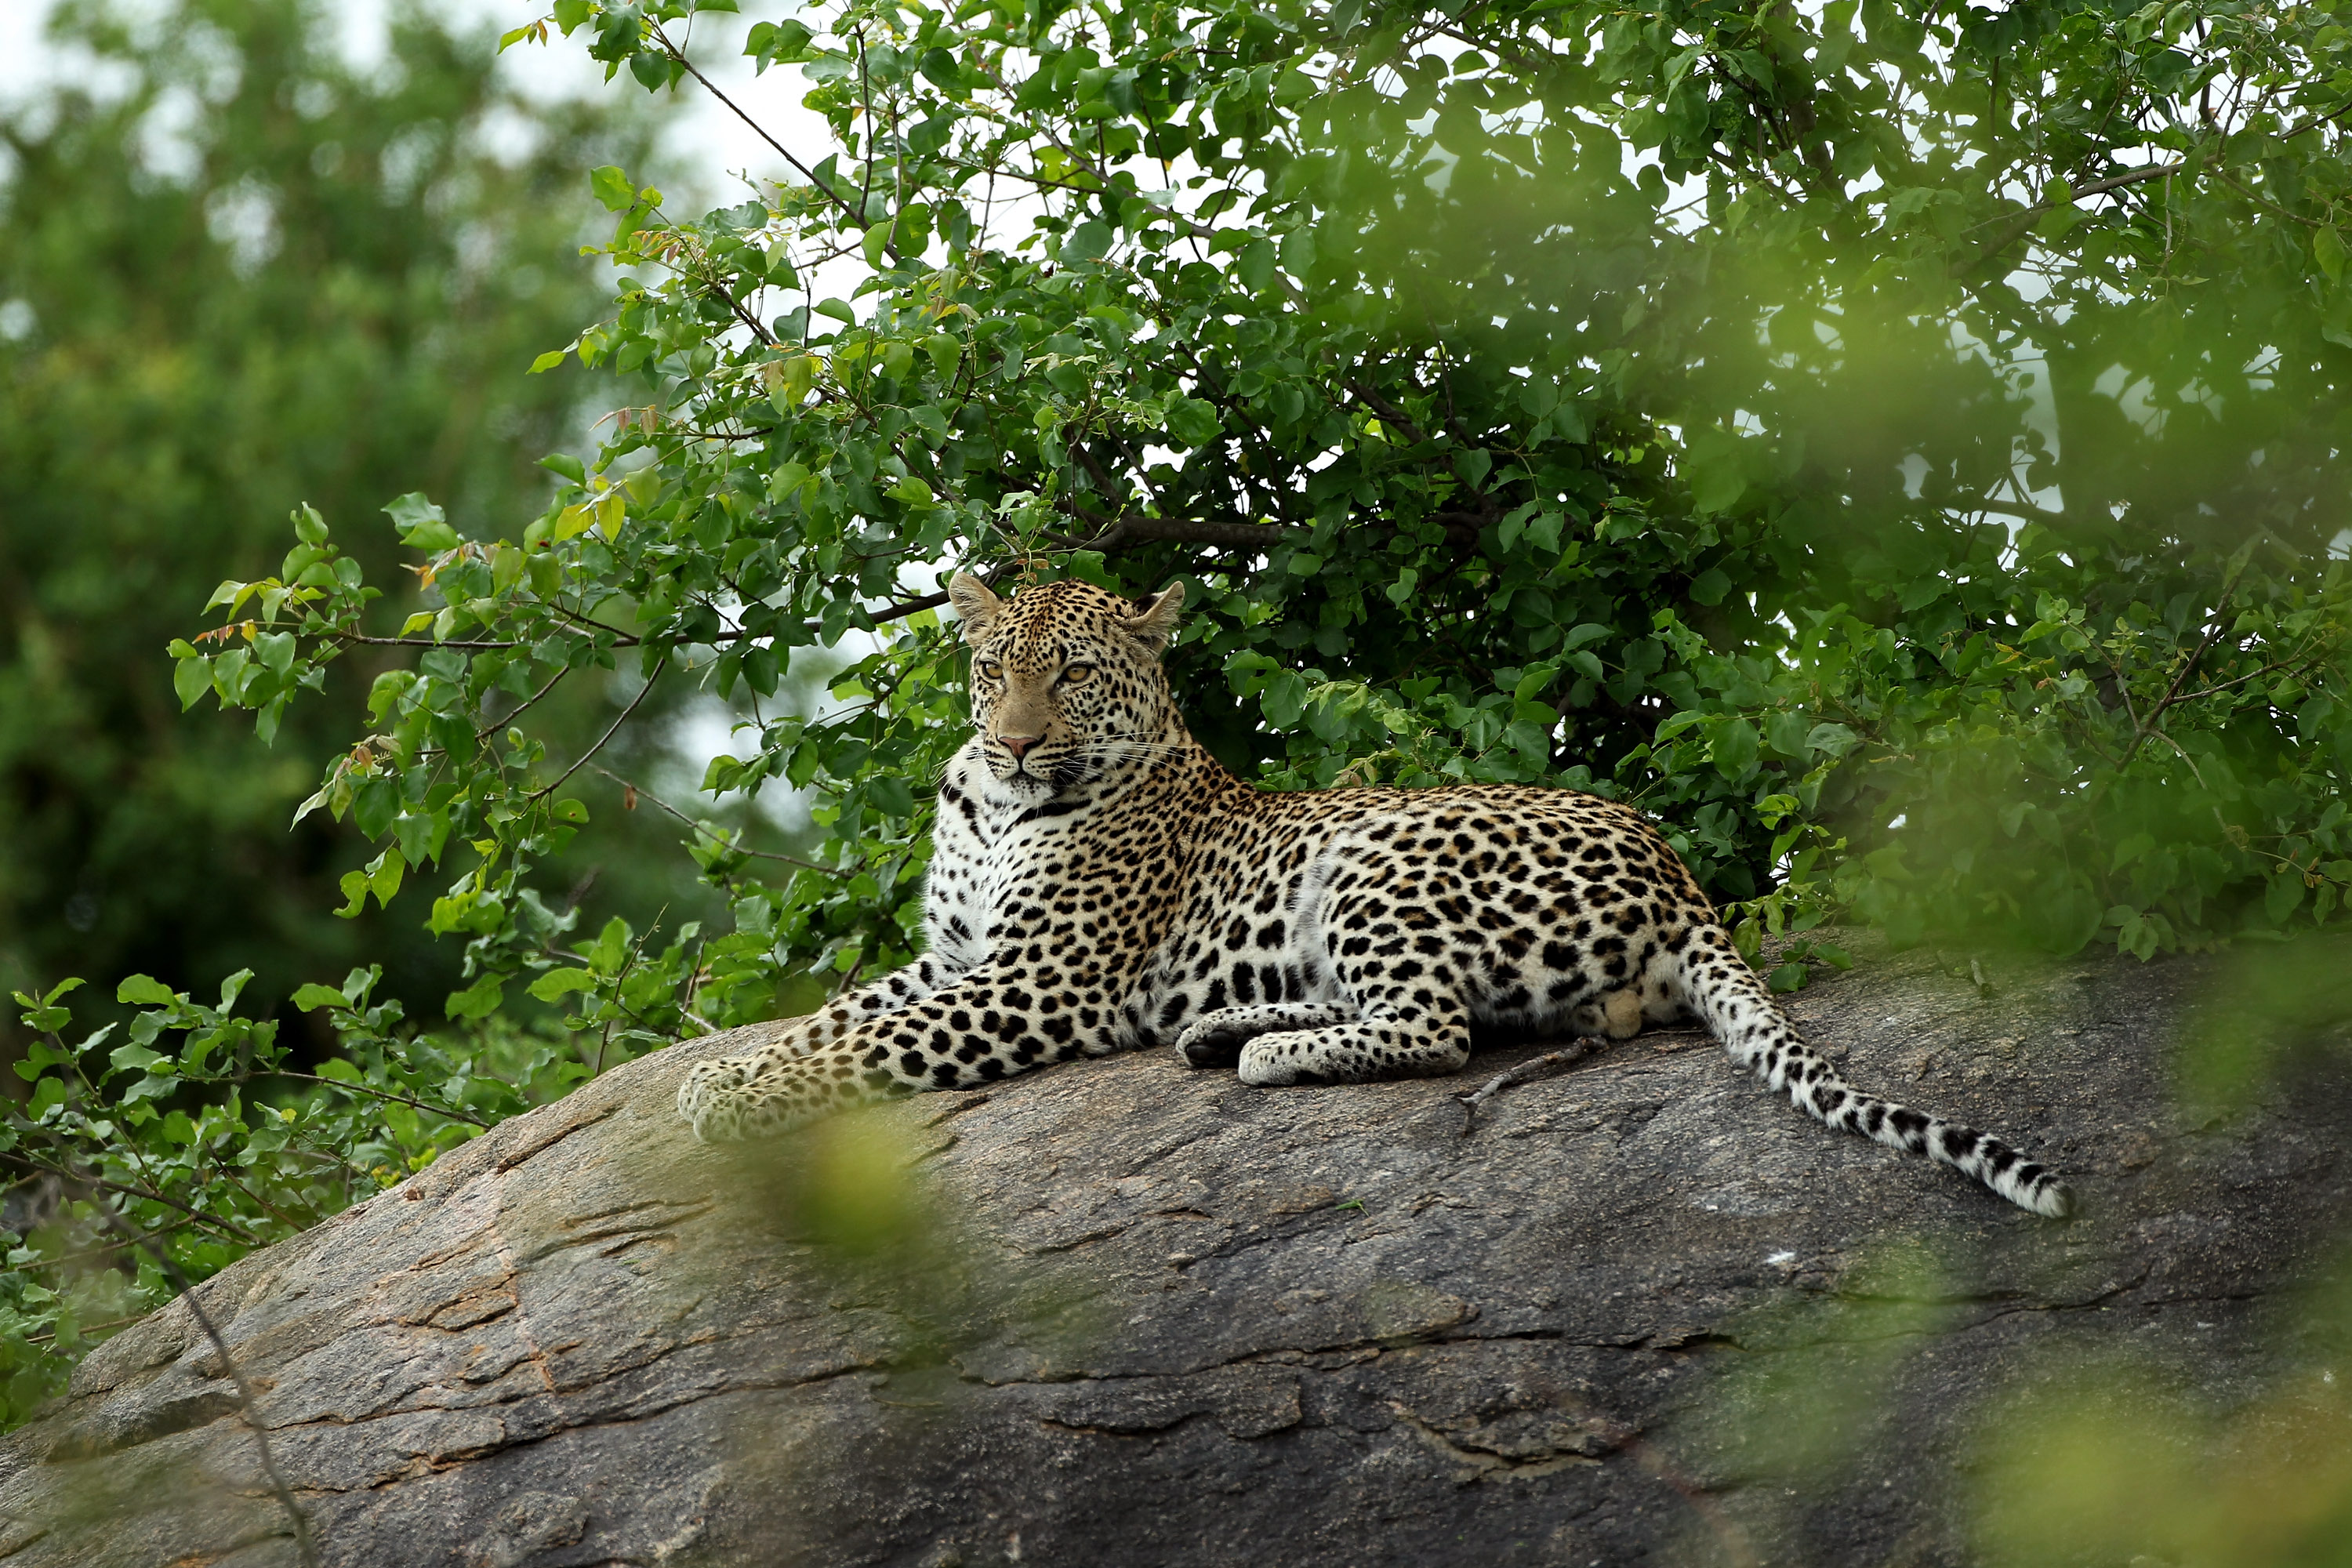 MALELANE, SOUTH AFRICA - DECEMBER 08: A leopard is pictured in the Kruger National Park during practice for the Alfred Dunhill Championship at Leopard Creek on December 8, 2010 in Malelane, South Africa. Leopards are frequently seen on the course. (Photo by Warren Little/Getty Images)